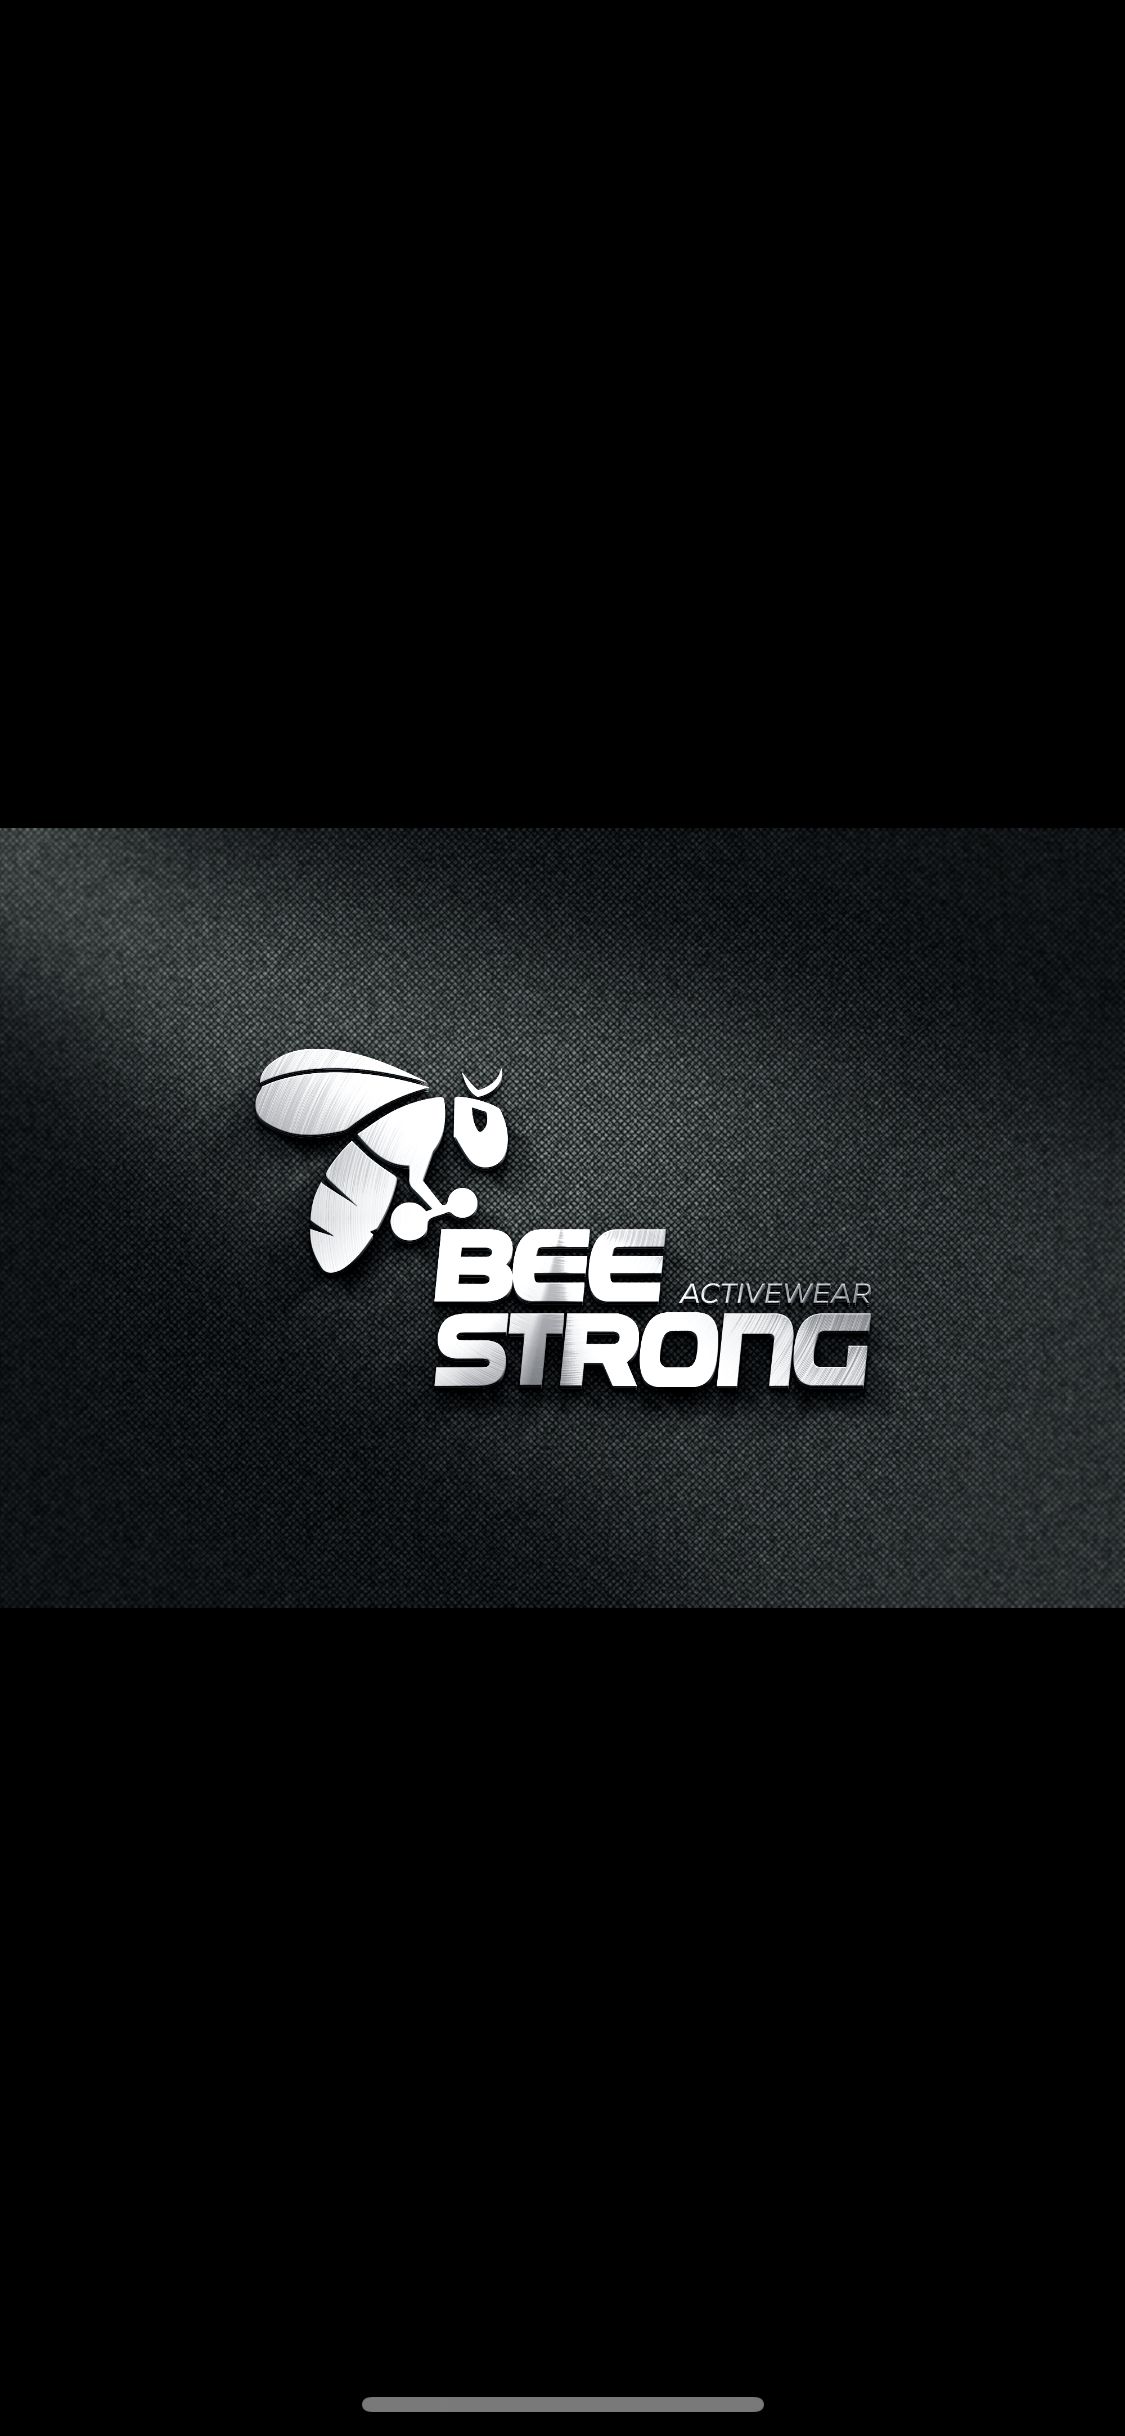 Bee strong activewear